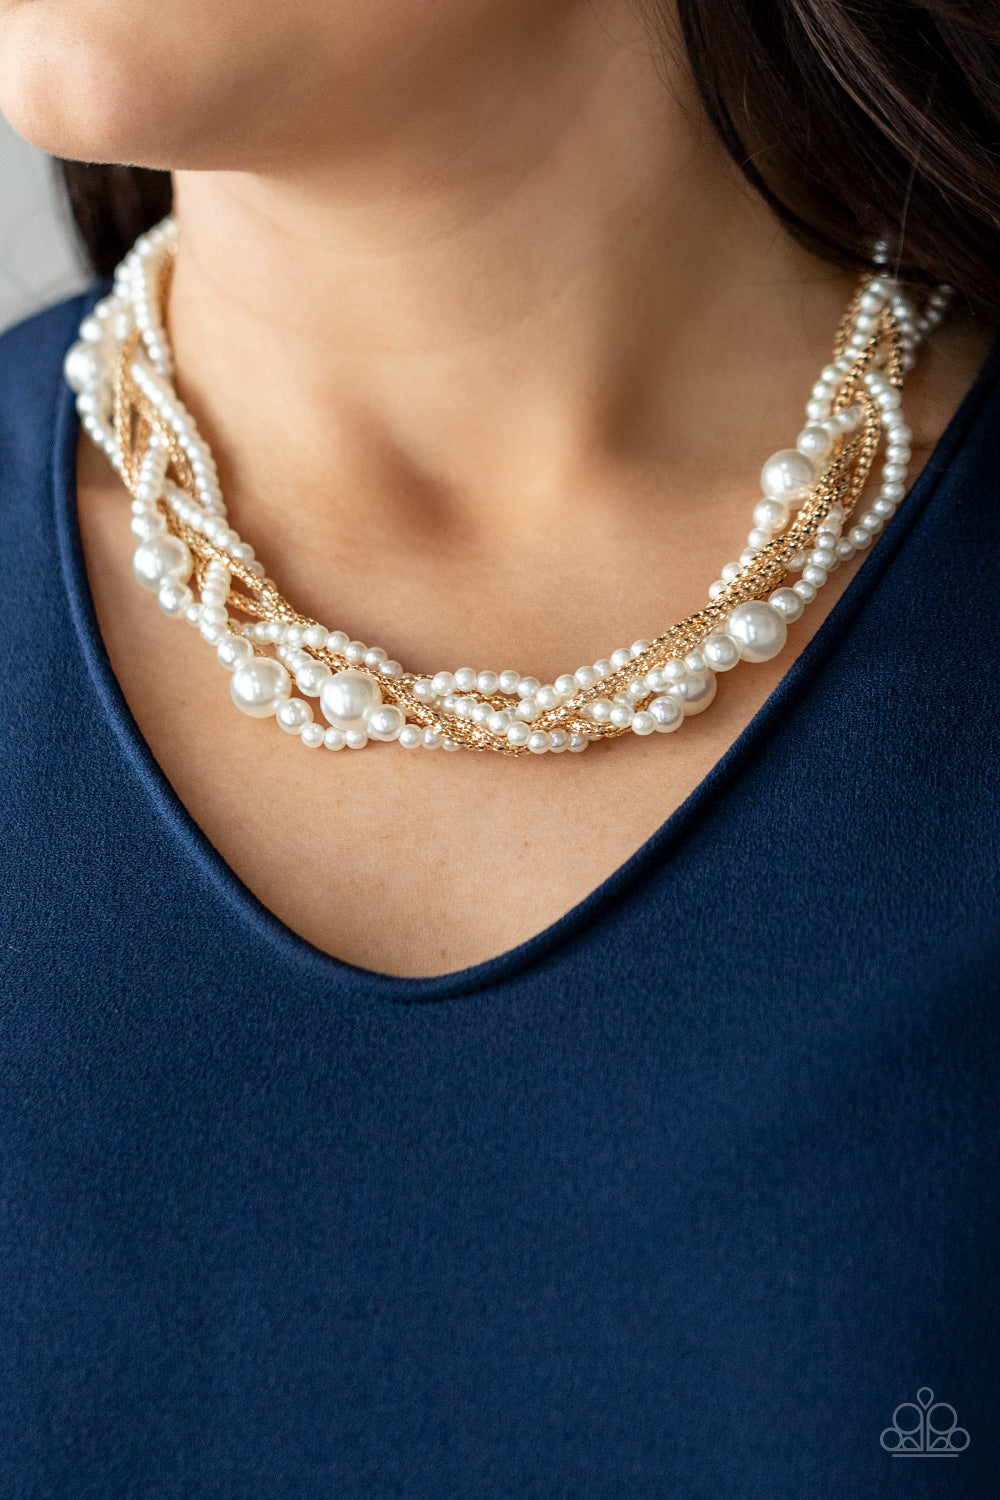 Royal Reminiscence - Gold/White pearl necklace